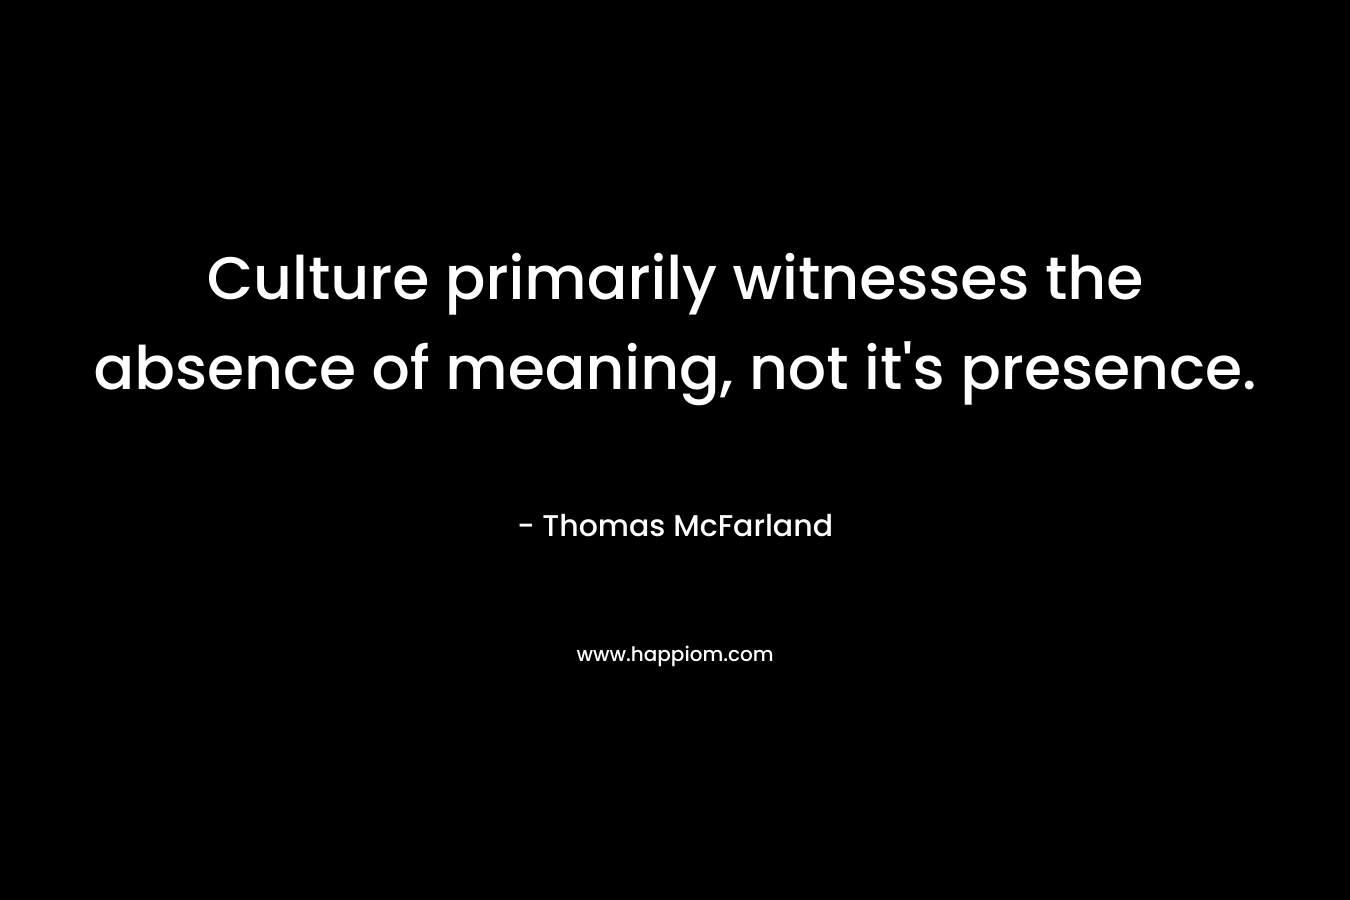 Culture primarily witnesses the absence of meaning, not it’s presence. – Thomas McFarland